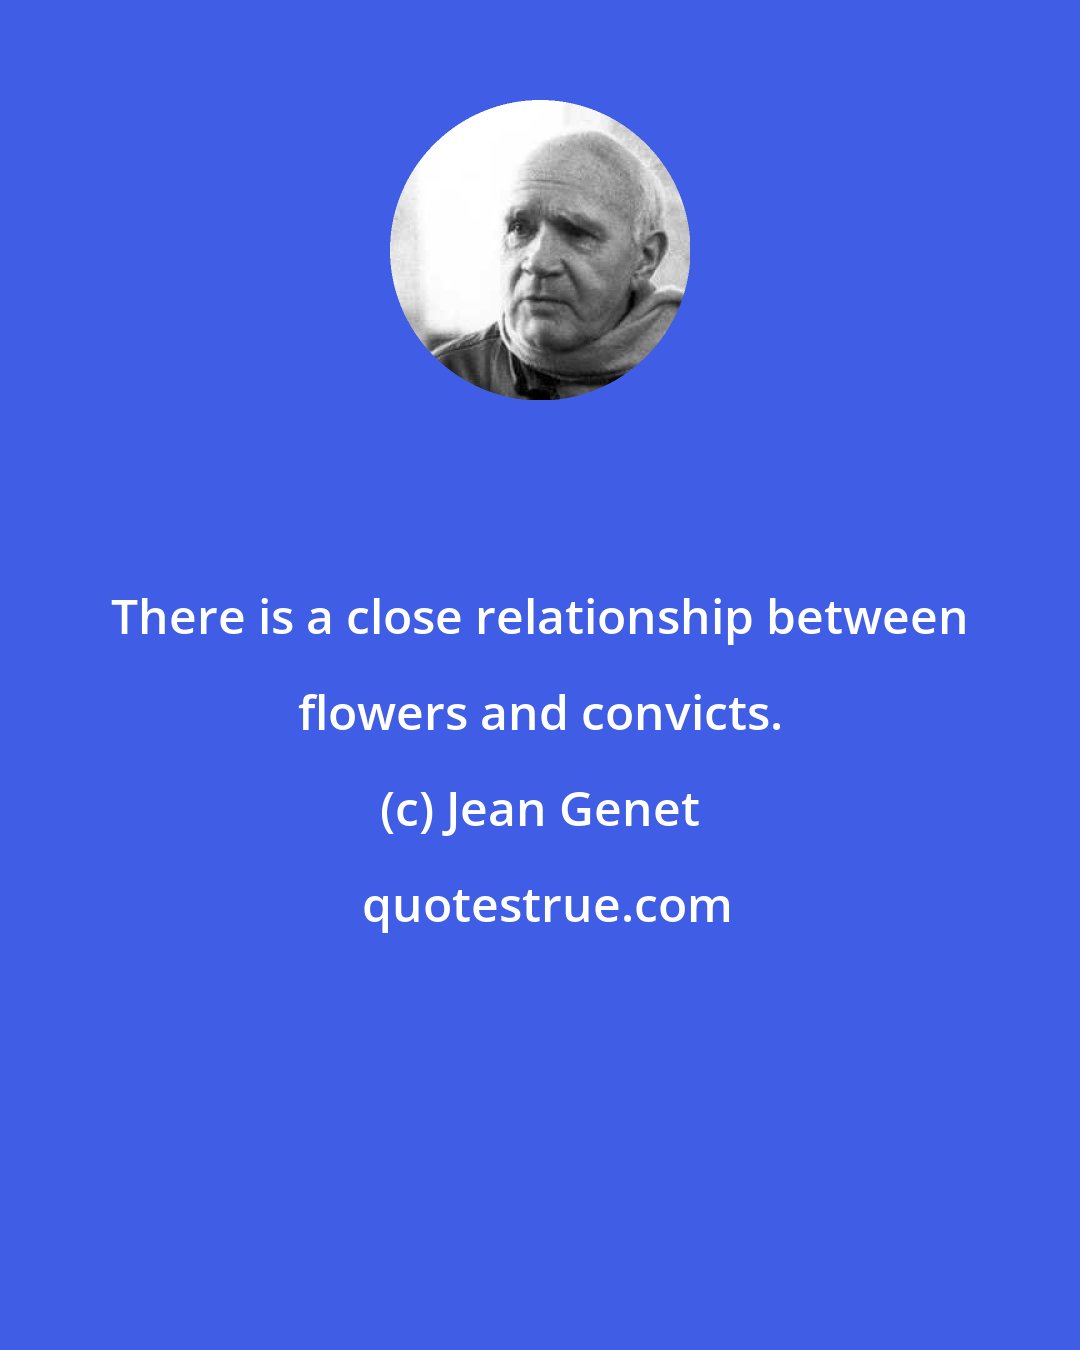 Jean Genet: There is a close relationship between flowers and convicts.